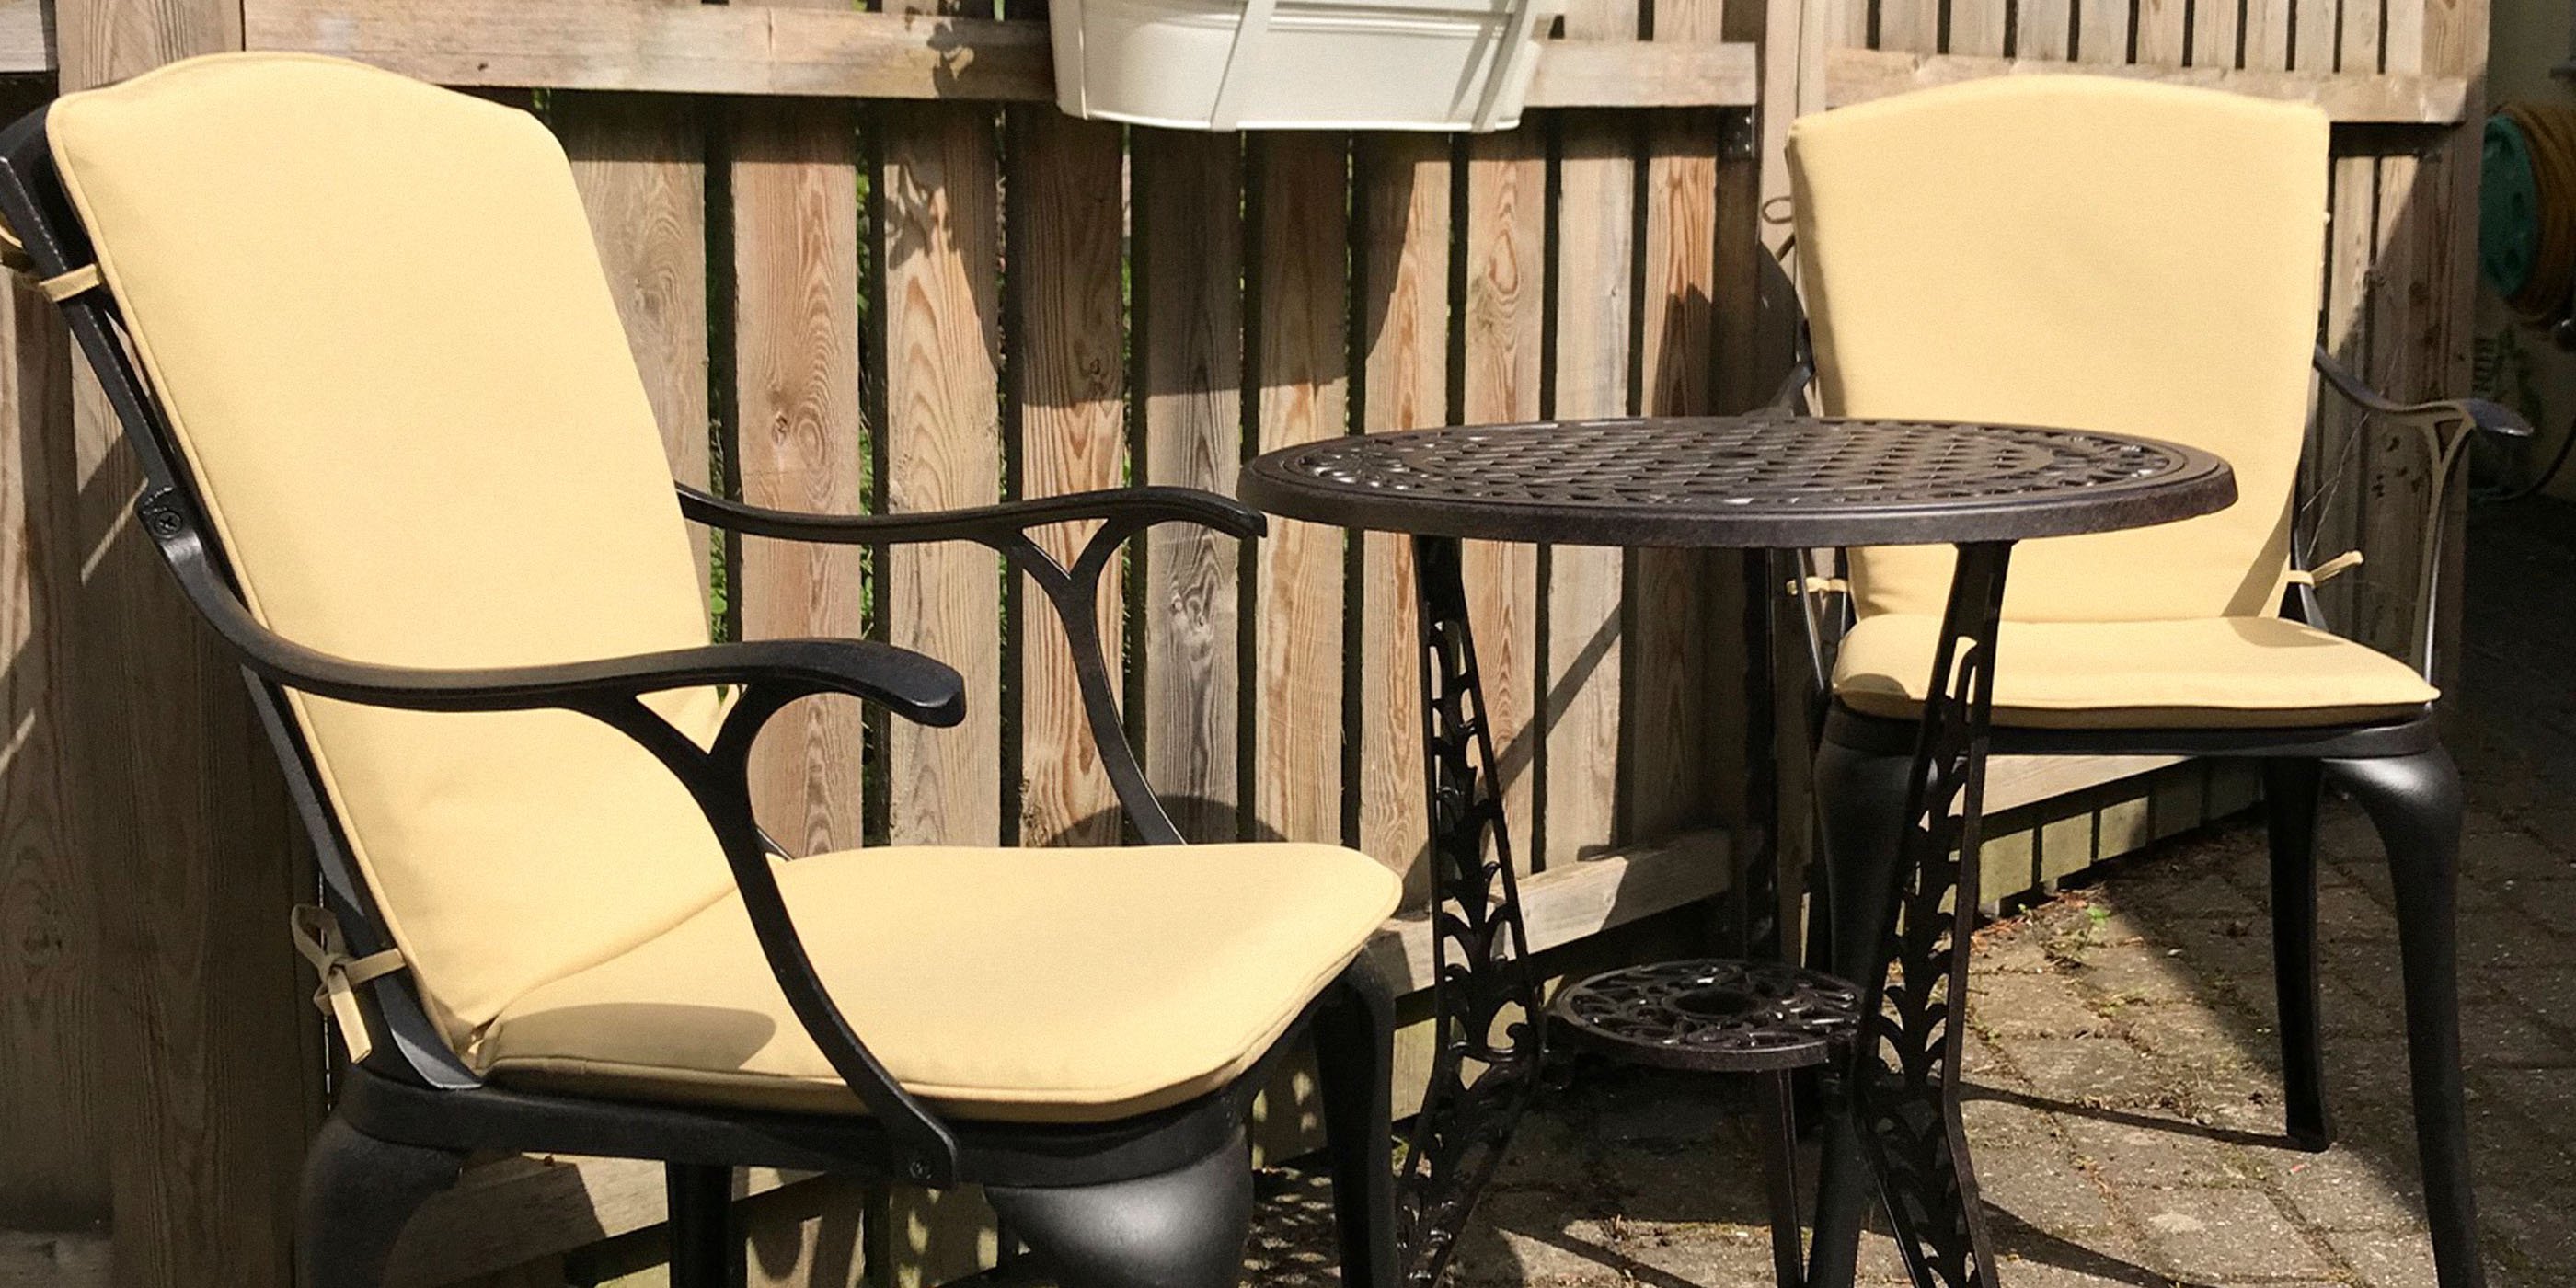 How To Clean Mould Off Outdoor Fabrics, How To Get Mould Out Of Garden Furniture Cushions